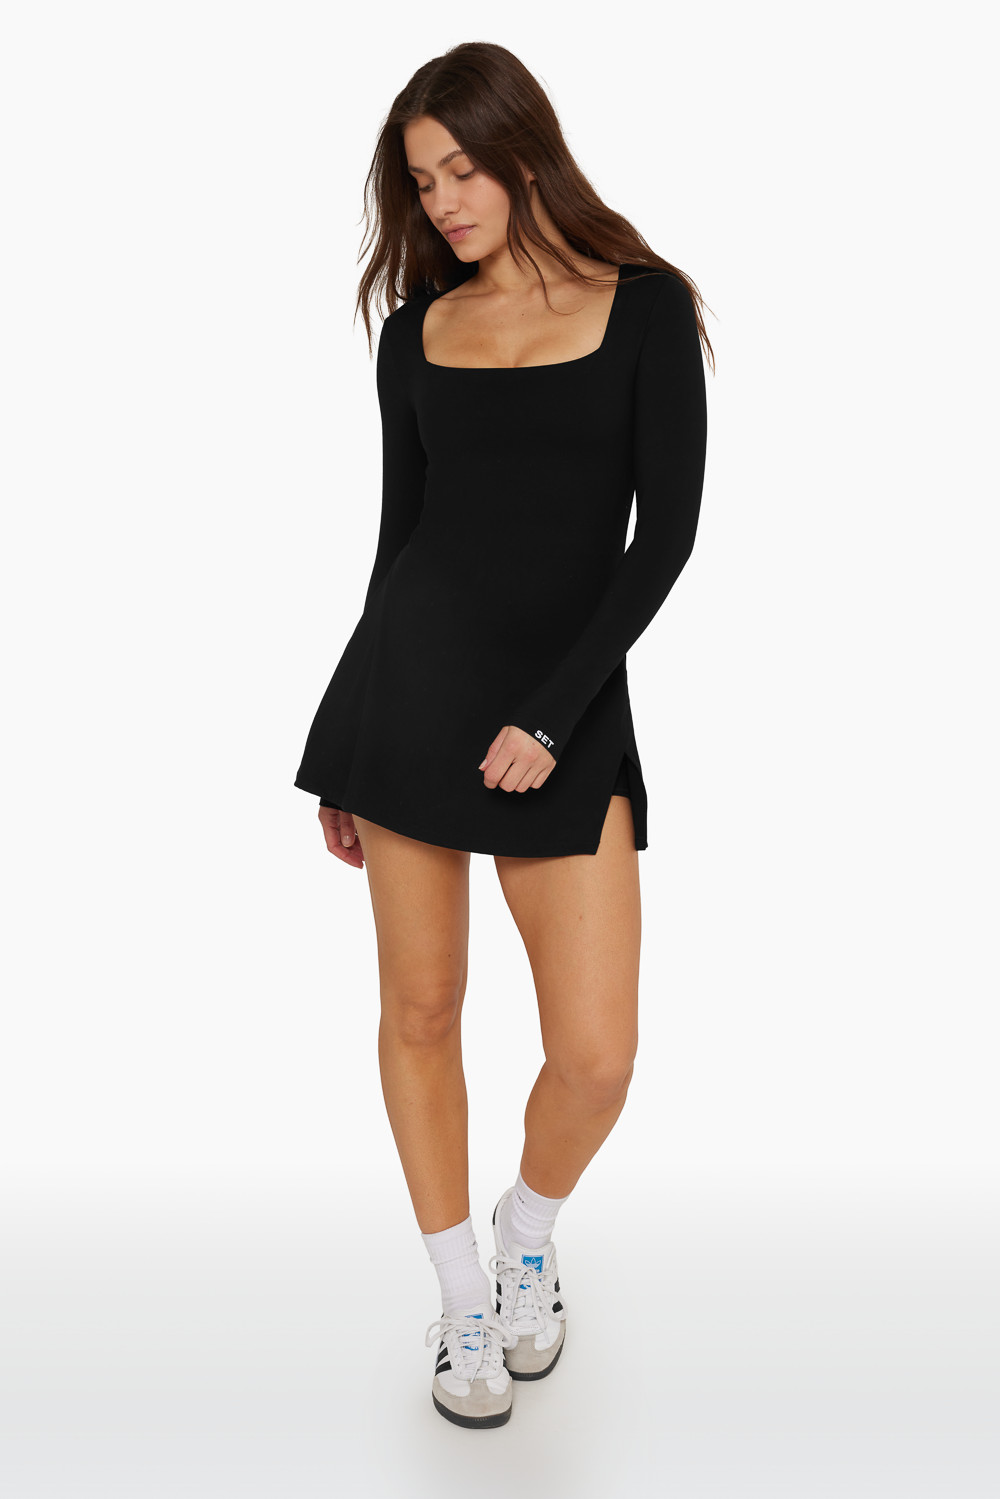 SPORTBODY® CROSSOVER DRESS - ONYX Featured Image